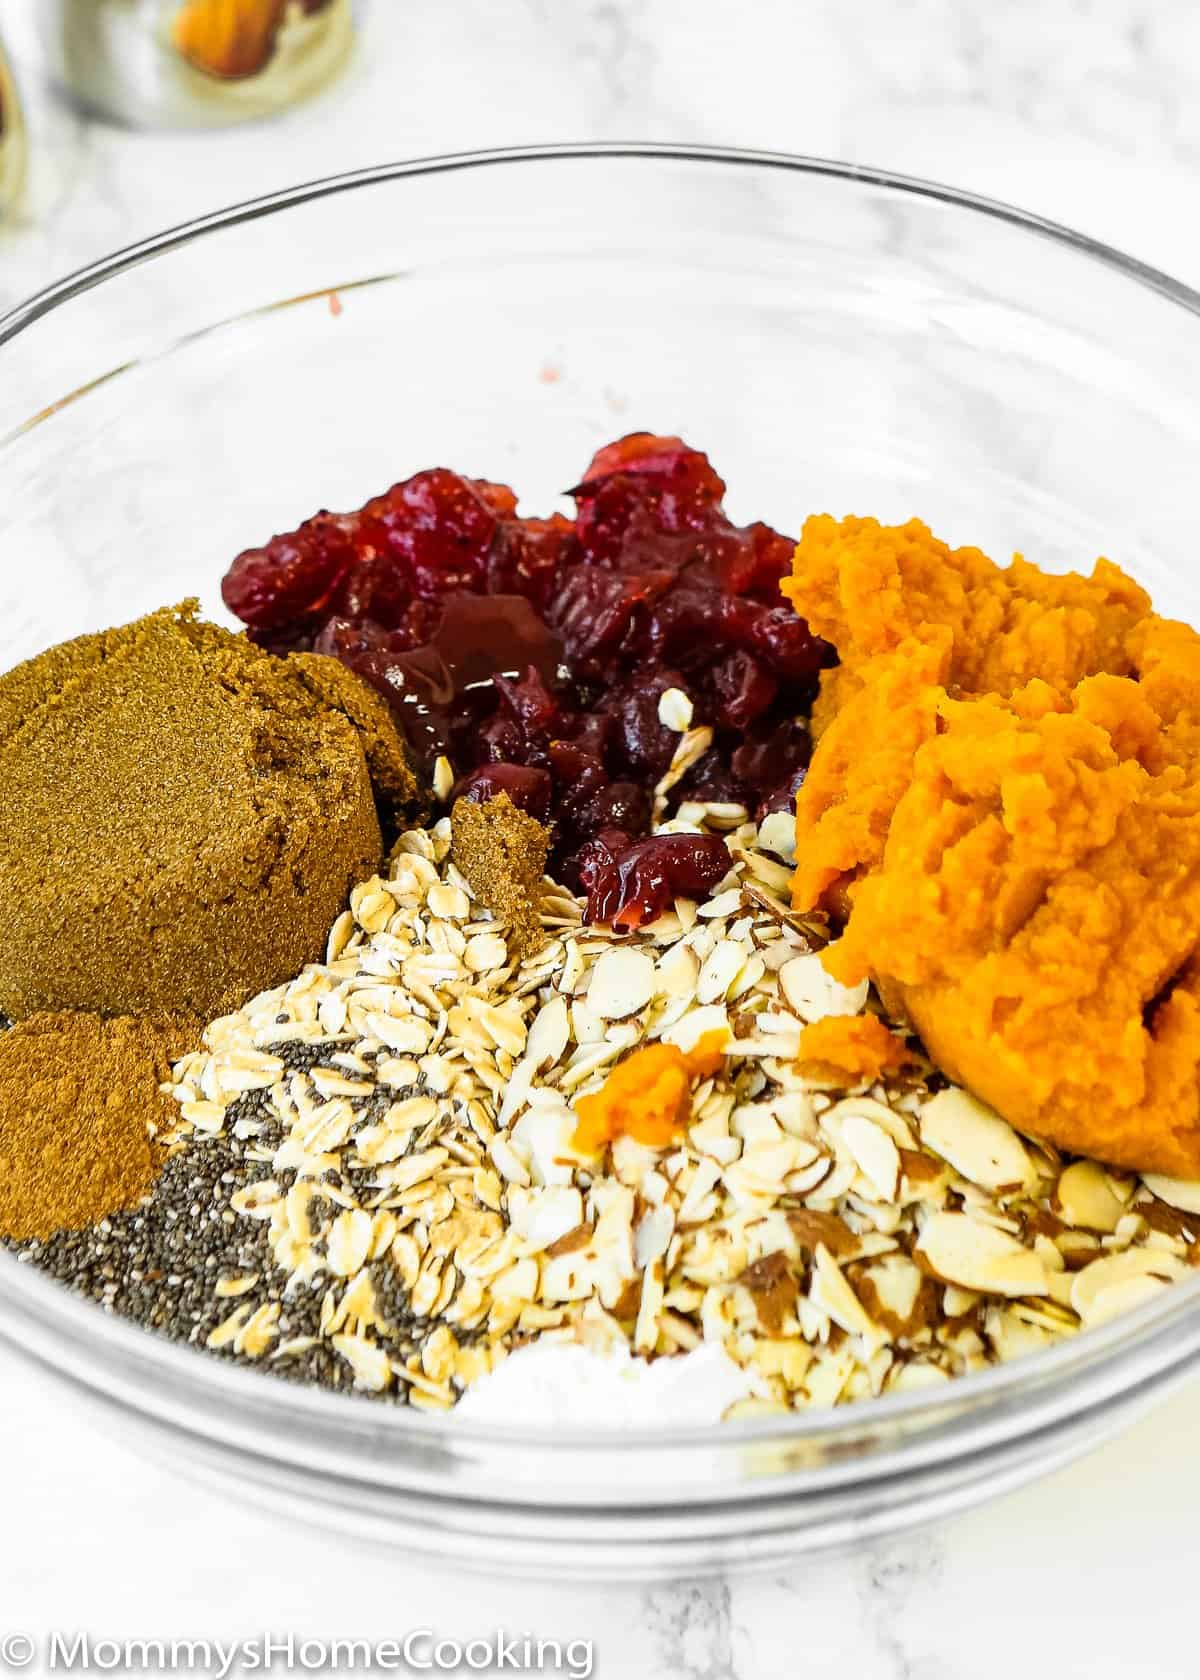 Eggless Pumpkin Baked Oatmeal ingredients in a bowl.